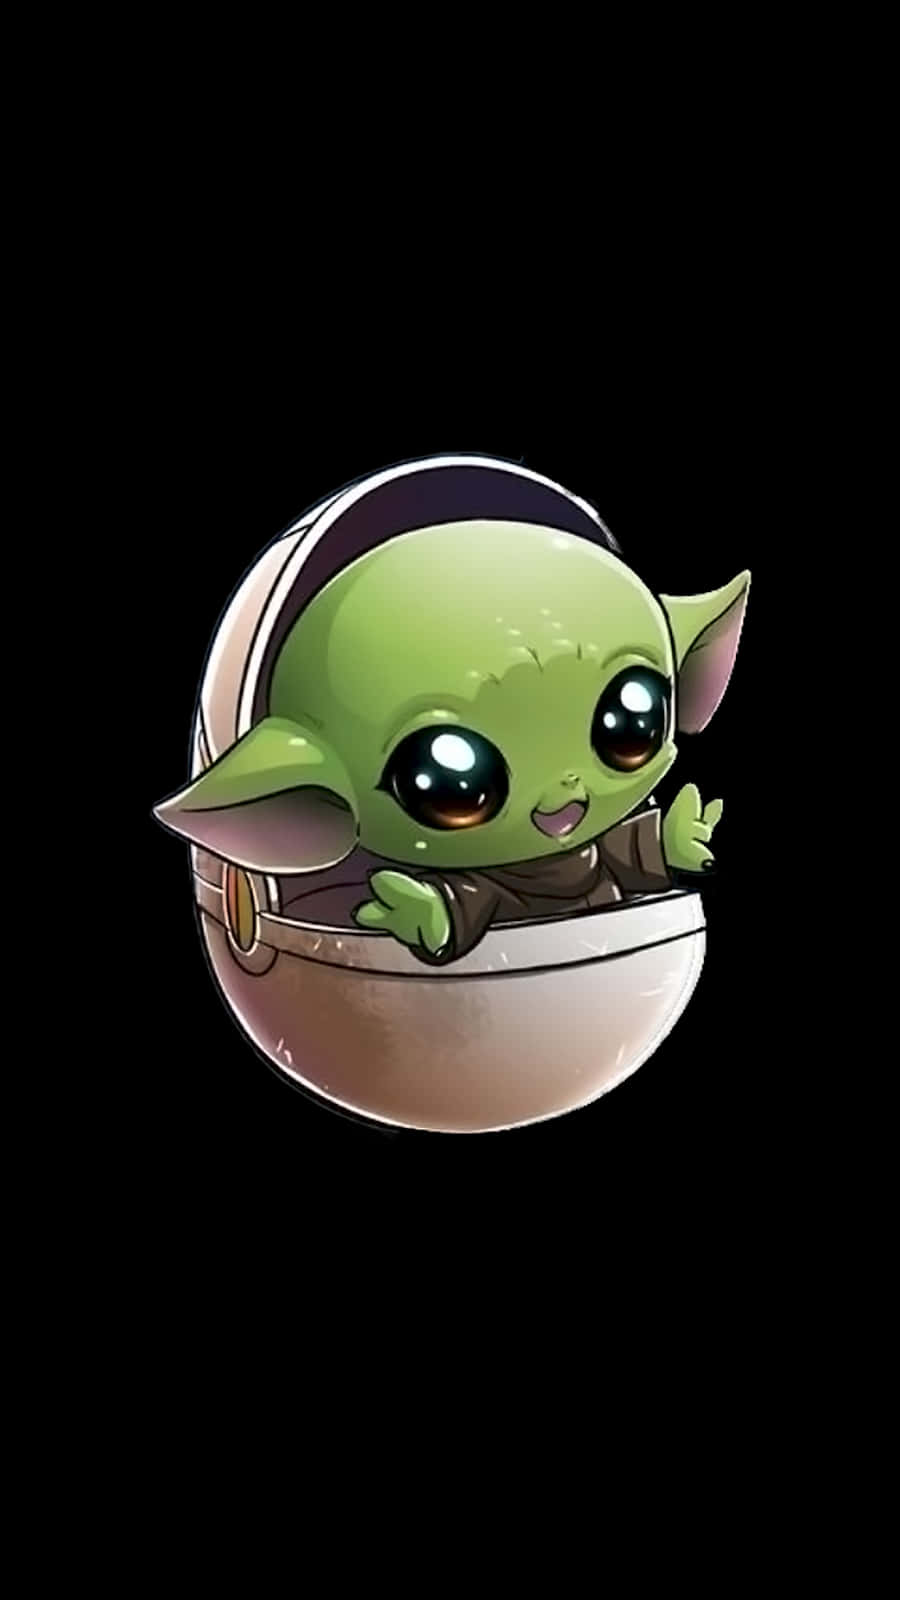 Stay connected with Baby Yoda Wallpaper